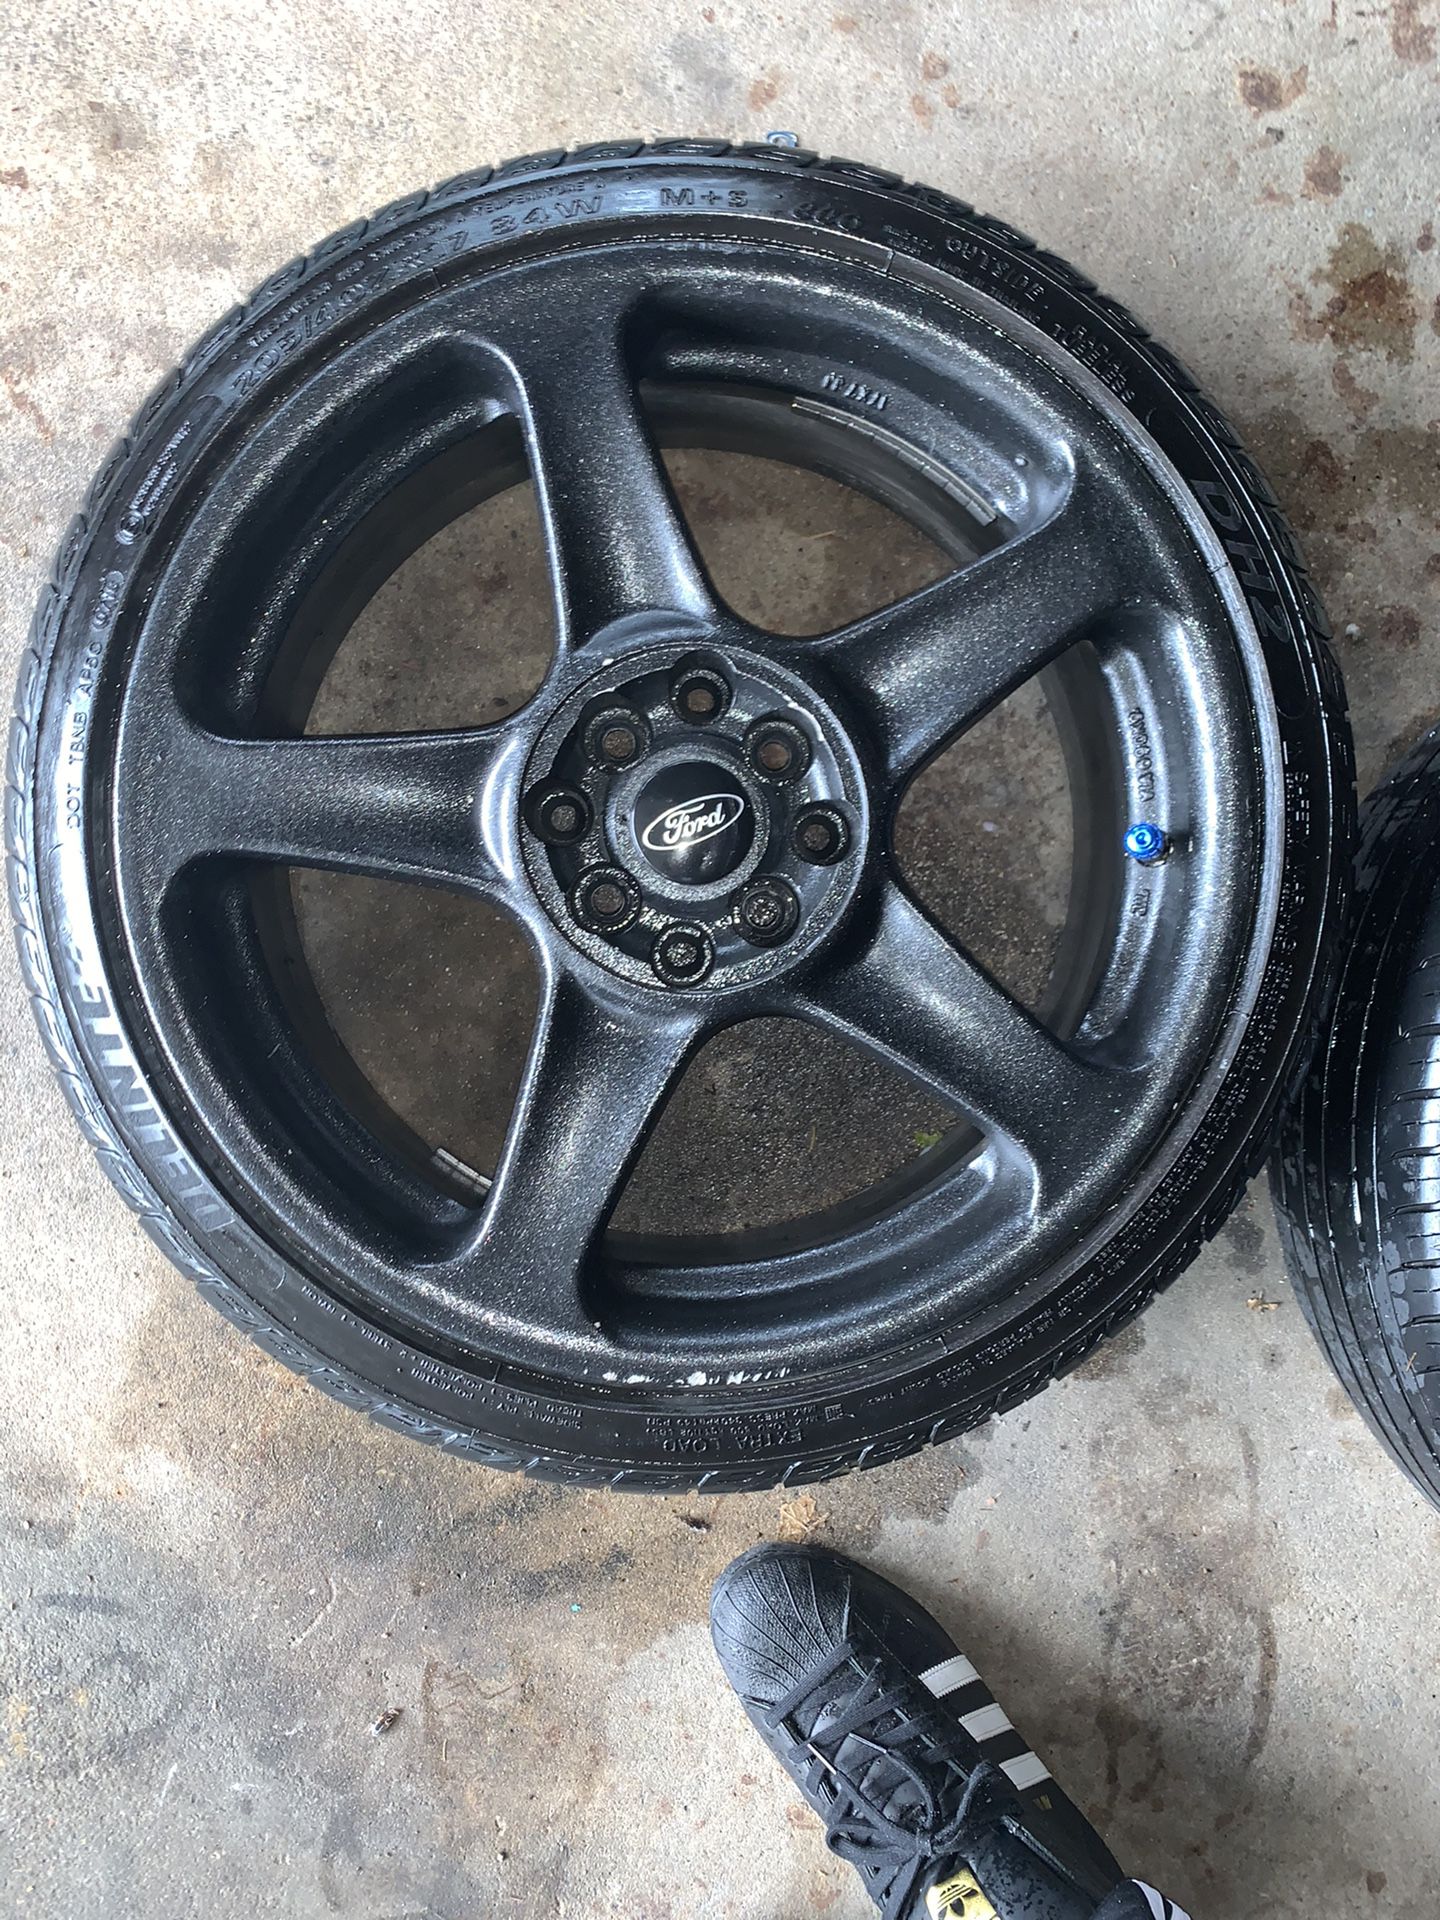 17” 4x100 bolt pattern painted black 3 of 4 tires good one has slow leak